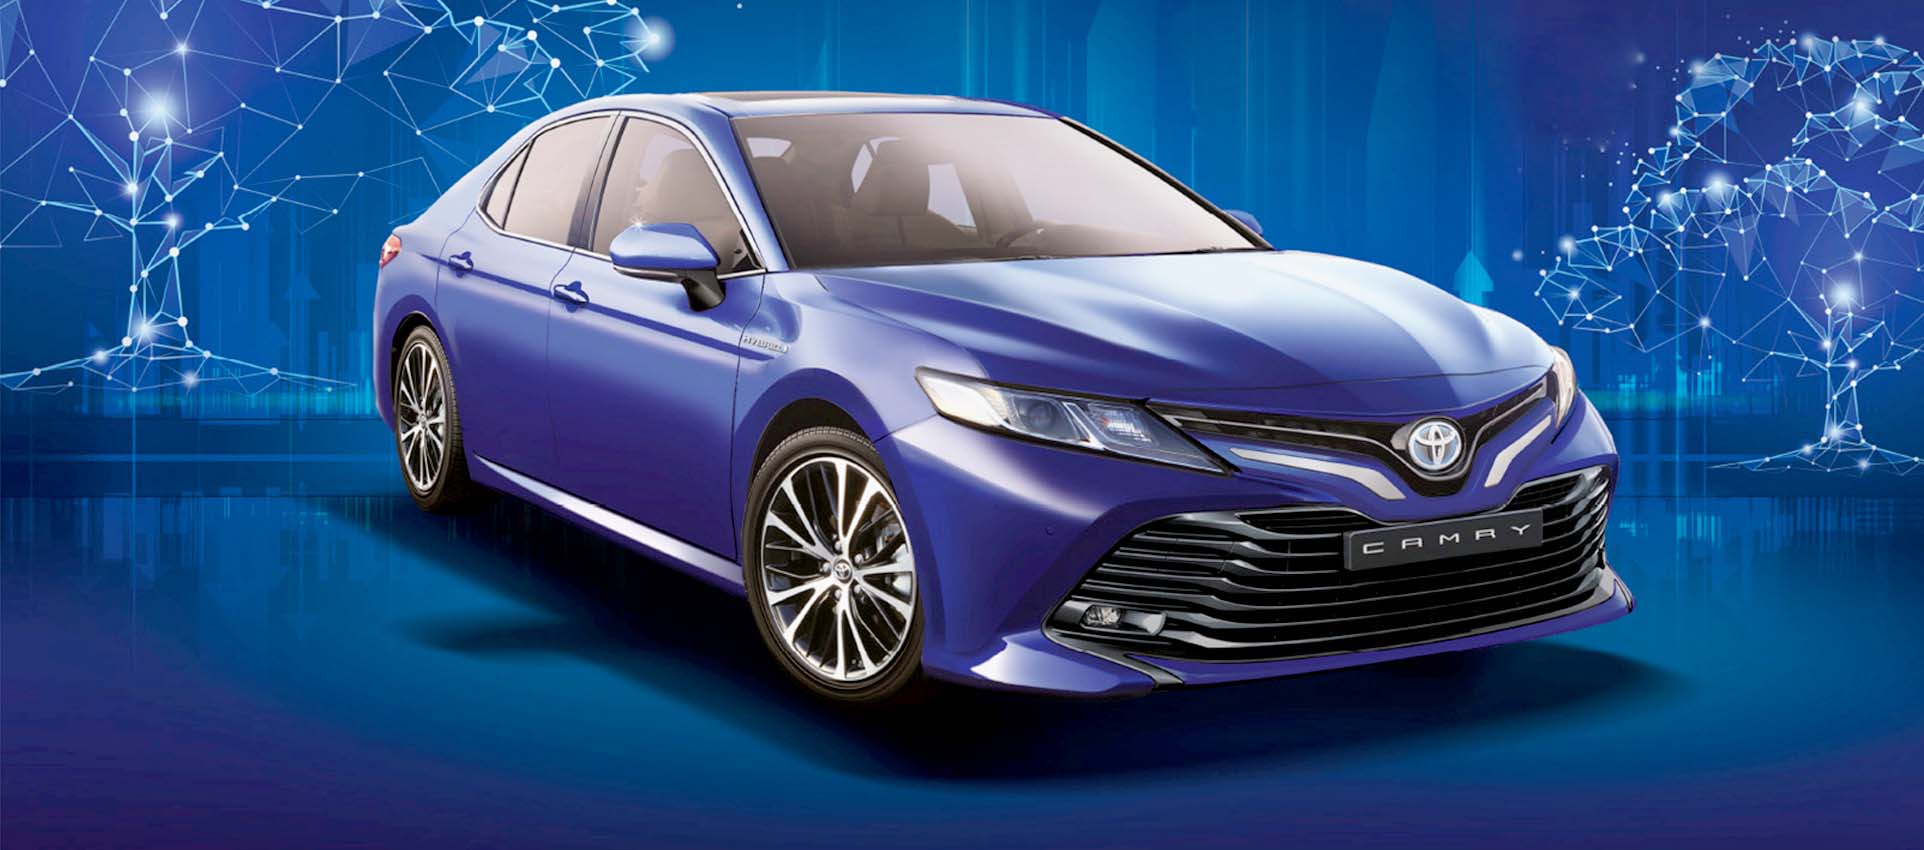 Toyota's Camry car with blue background